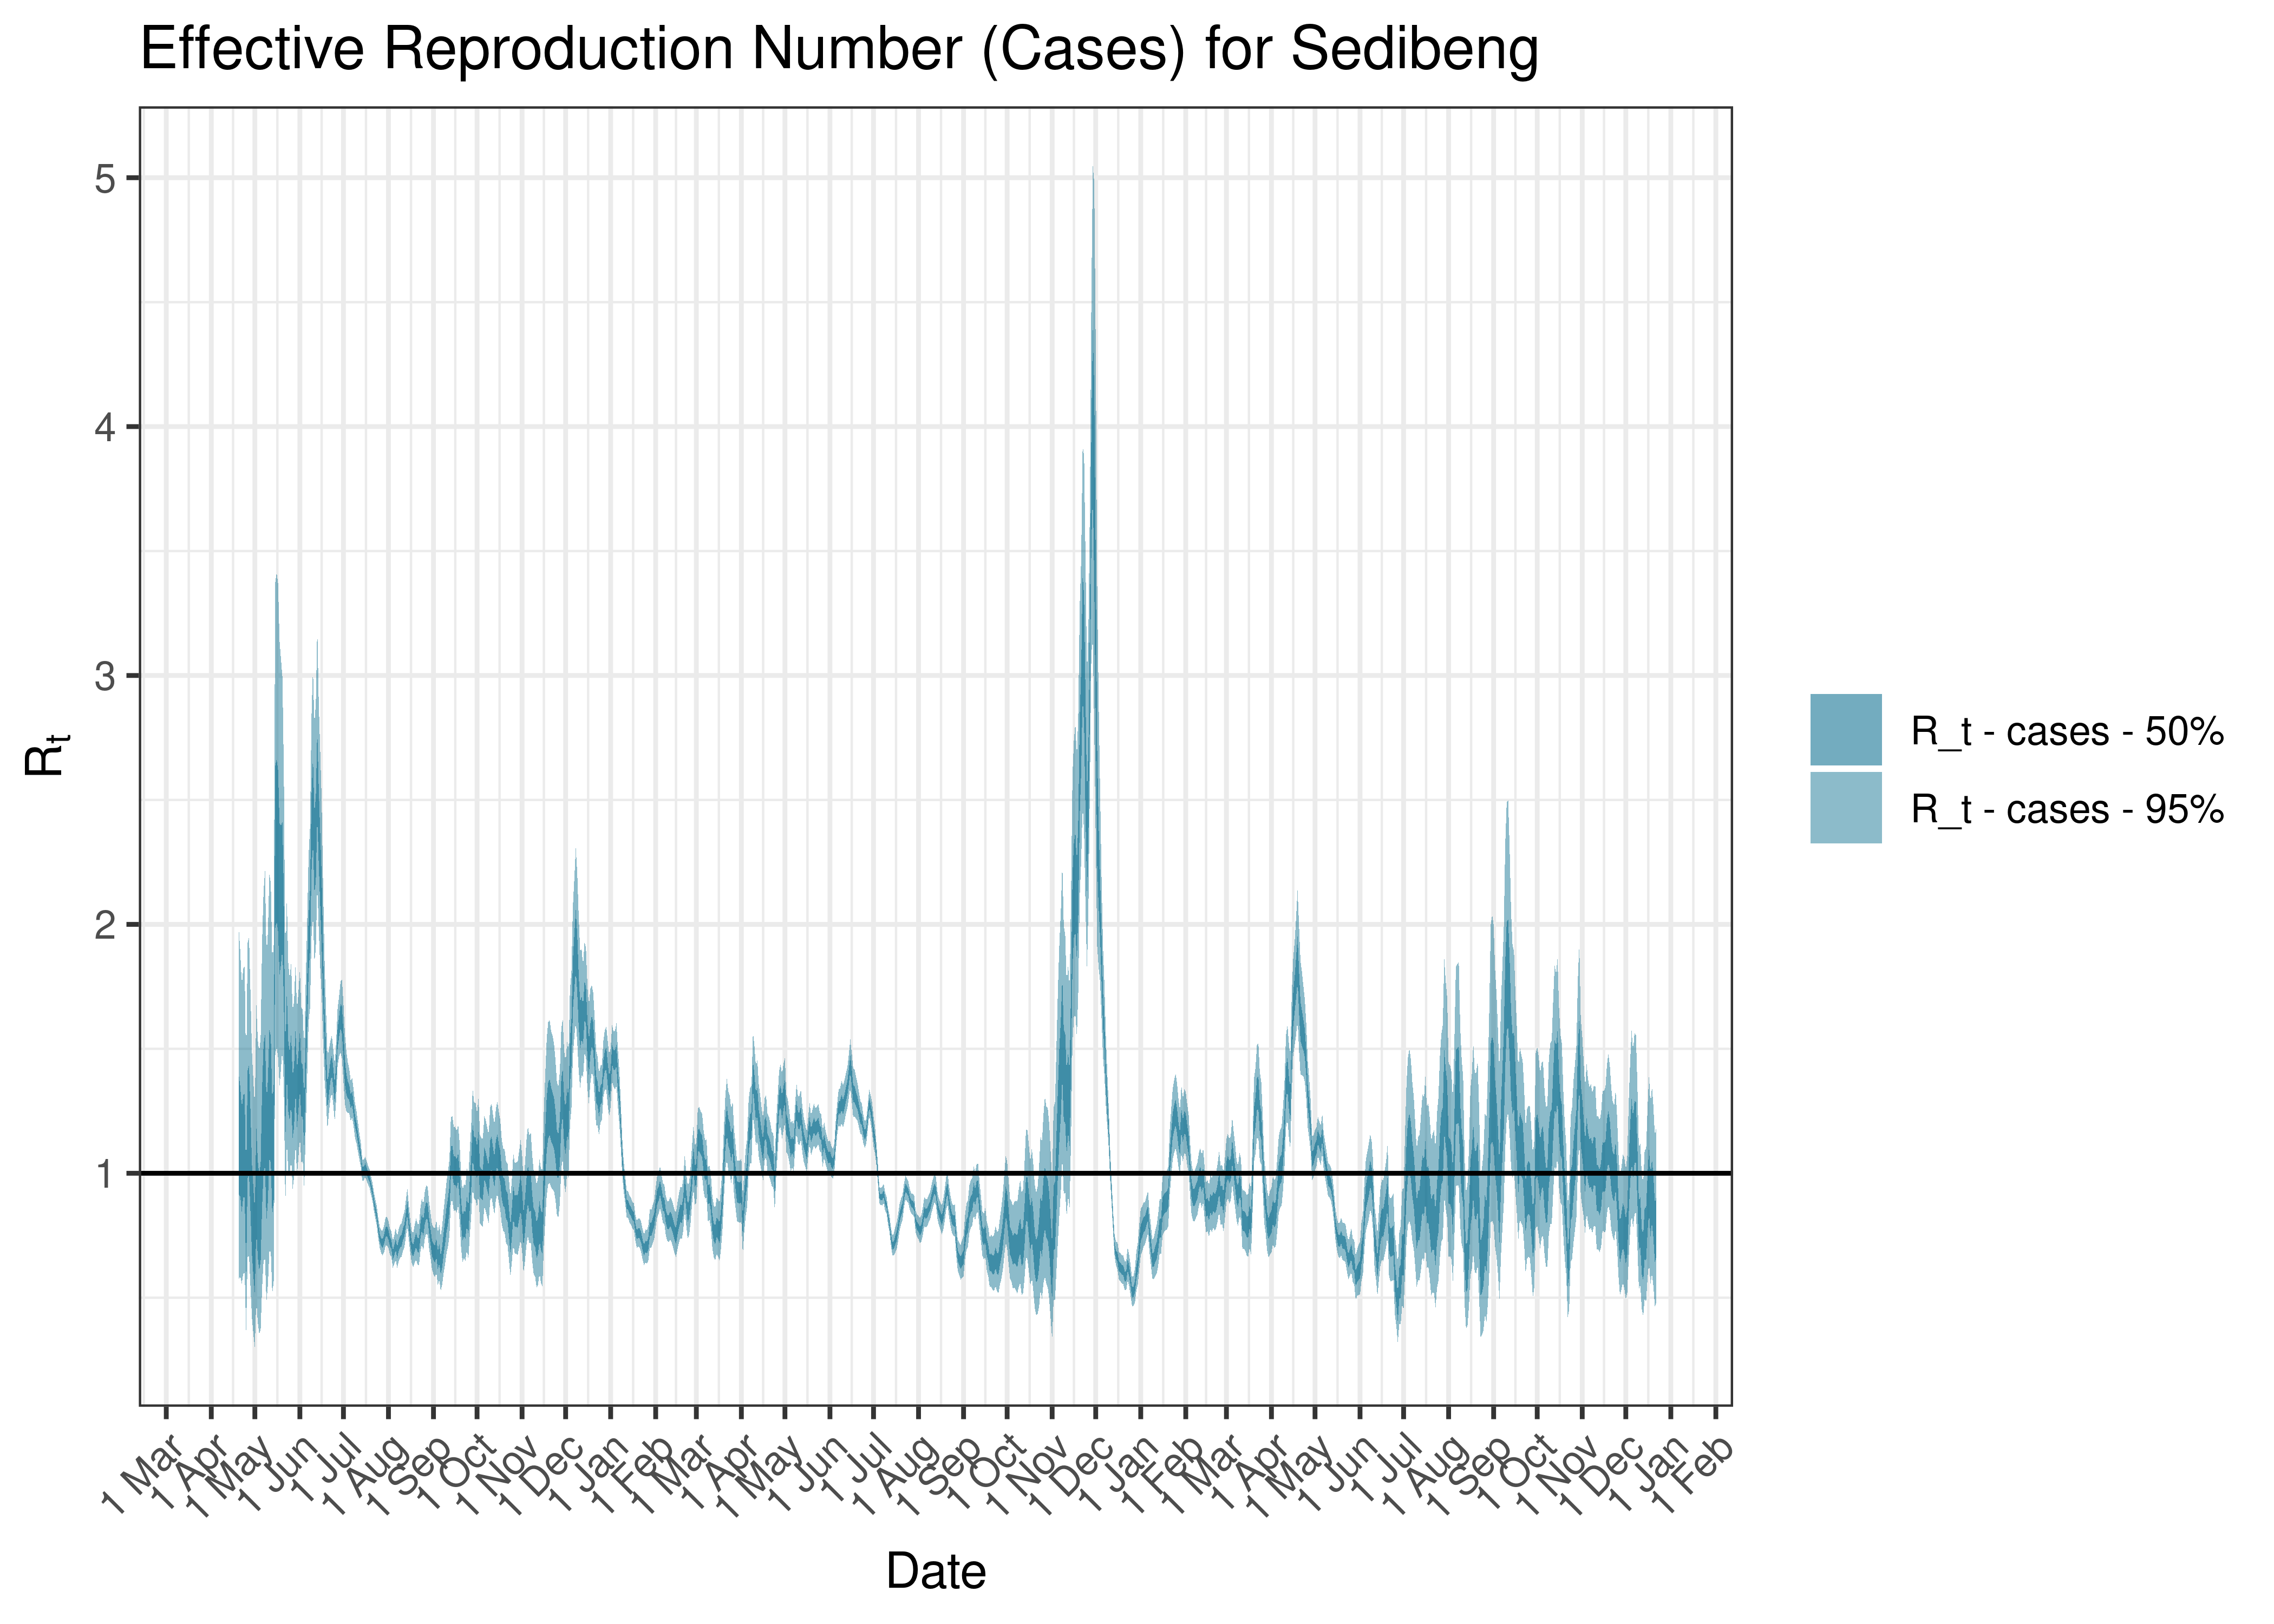 Estimated Effective Reproduction Number Based on Cases for Sedibeng since 1 April 2020